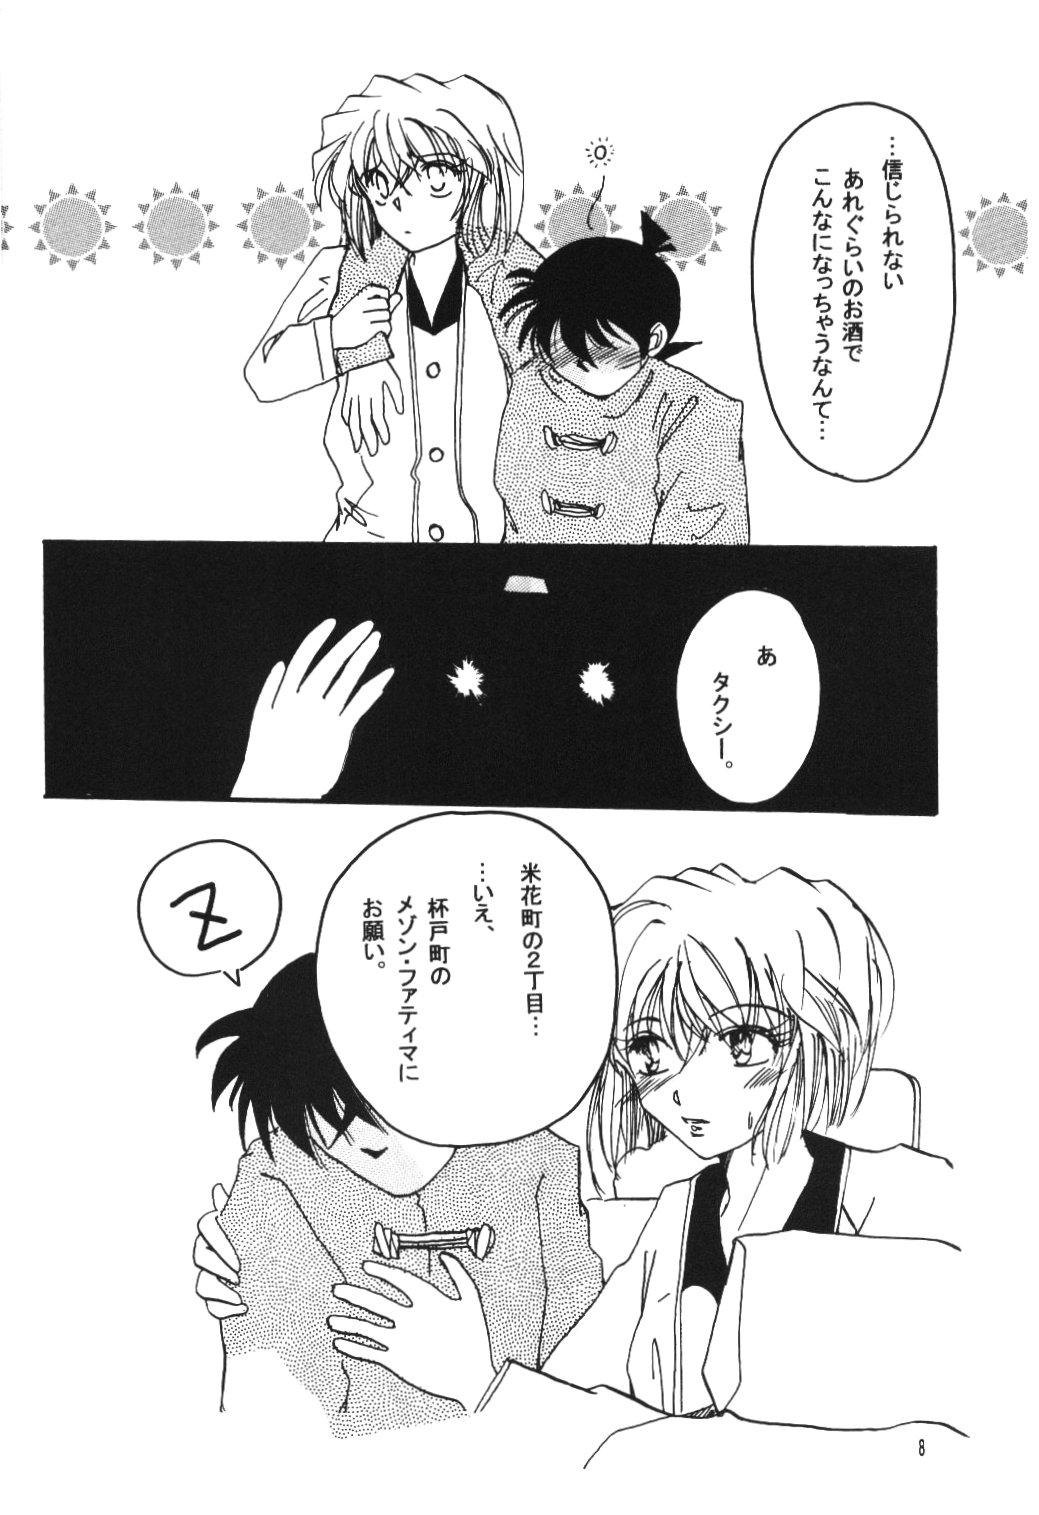 Gostosa Over Drive - Detective conan Couch - Page 7